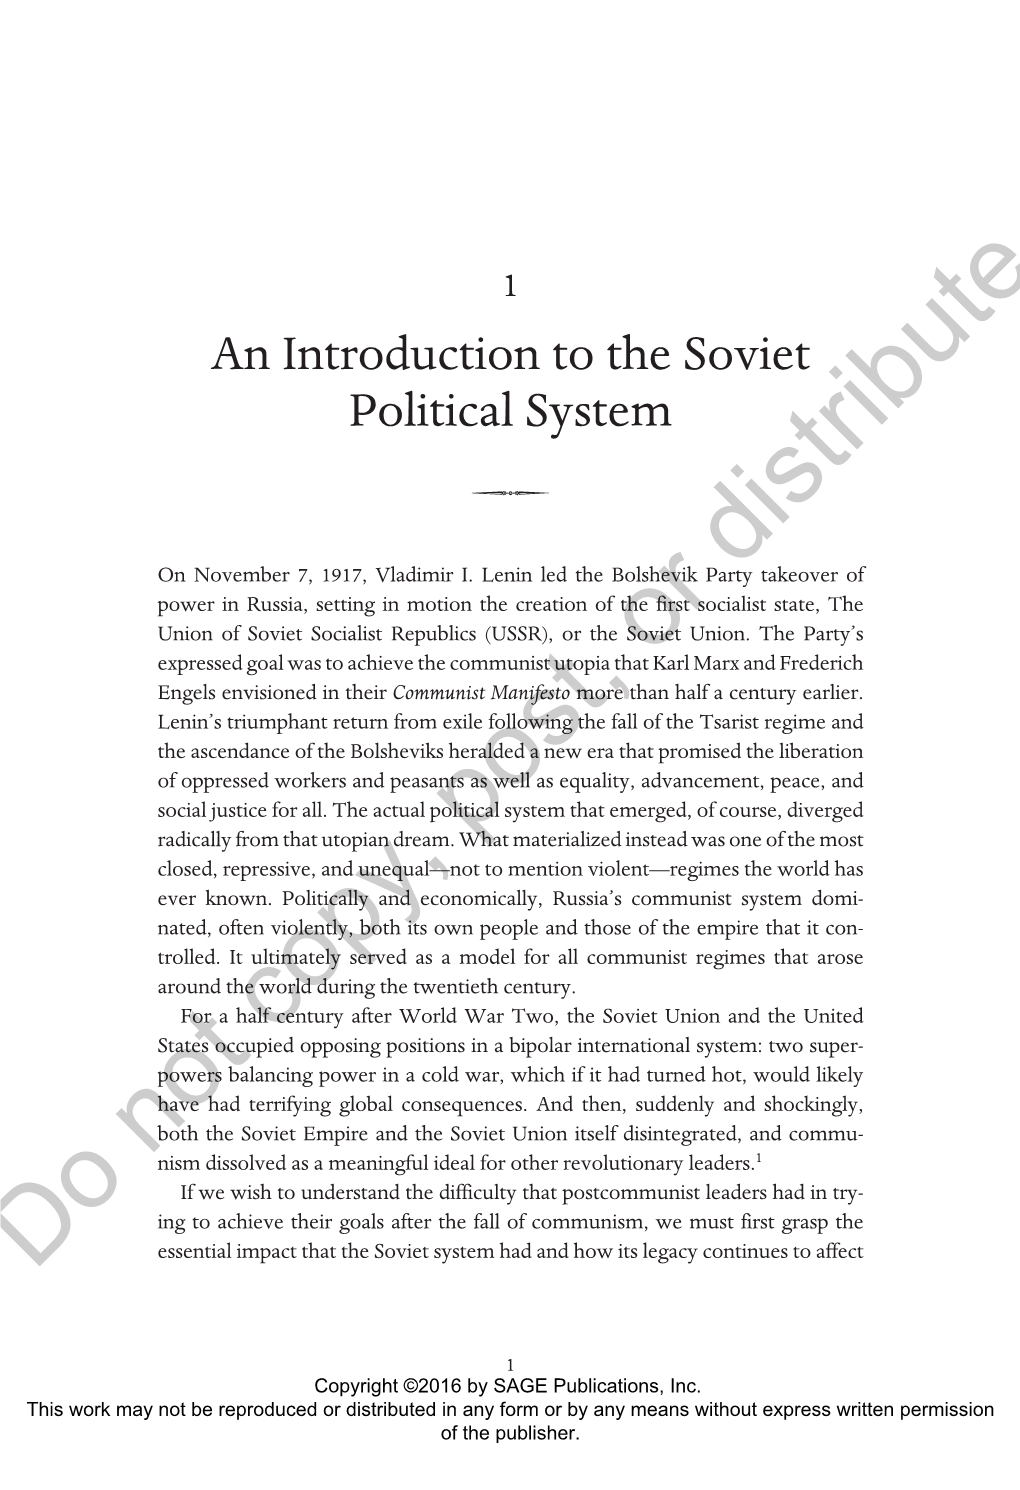 An Introduction to the Soviet Political System 